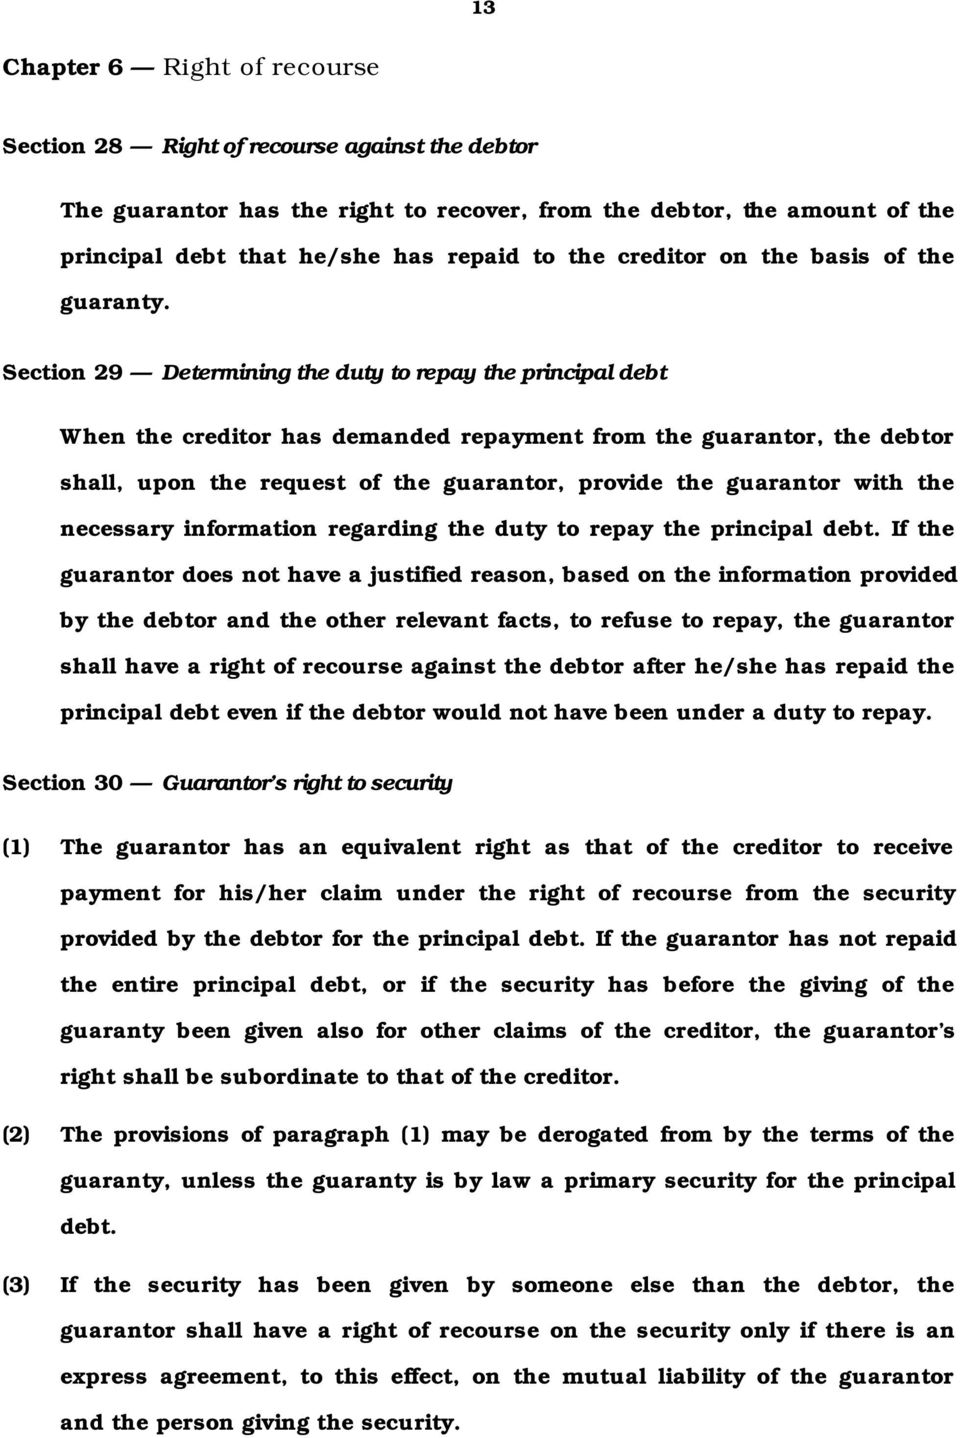 Section 29 Determining the duty to repay the principal debt When the creditor has demanded repayment from the guarantor, the debtor shall, upon the request of the guarantor, provide the guarantor